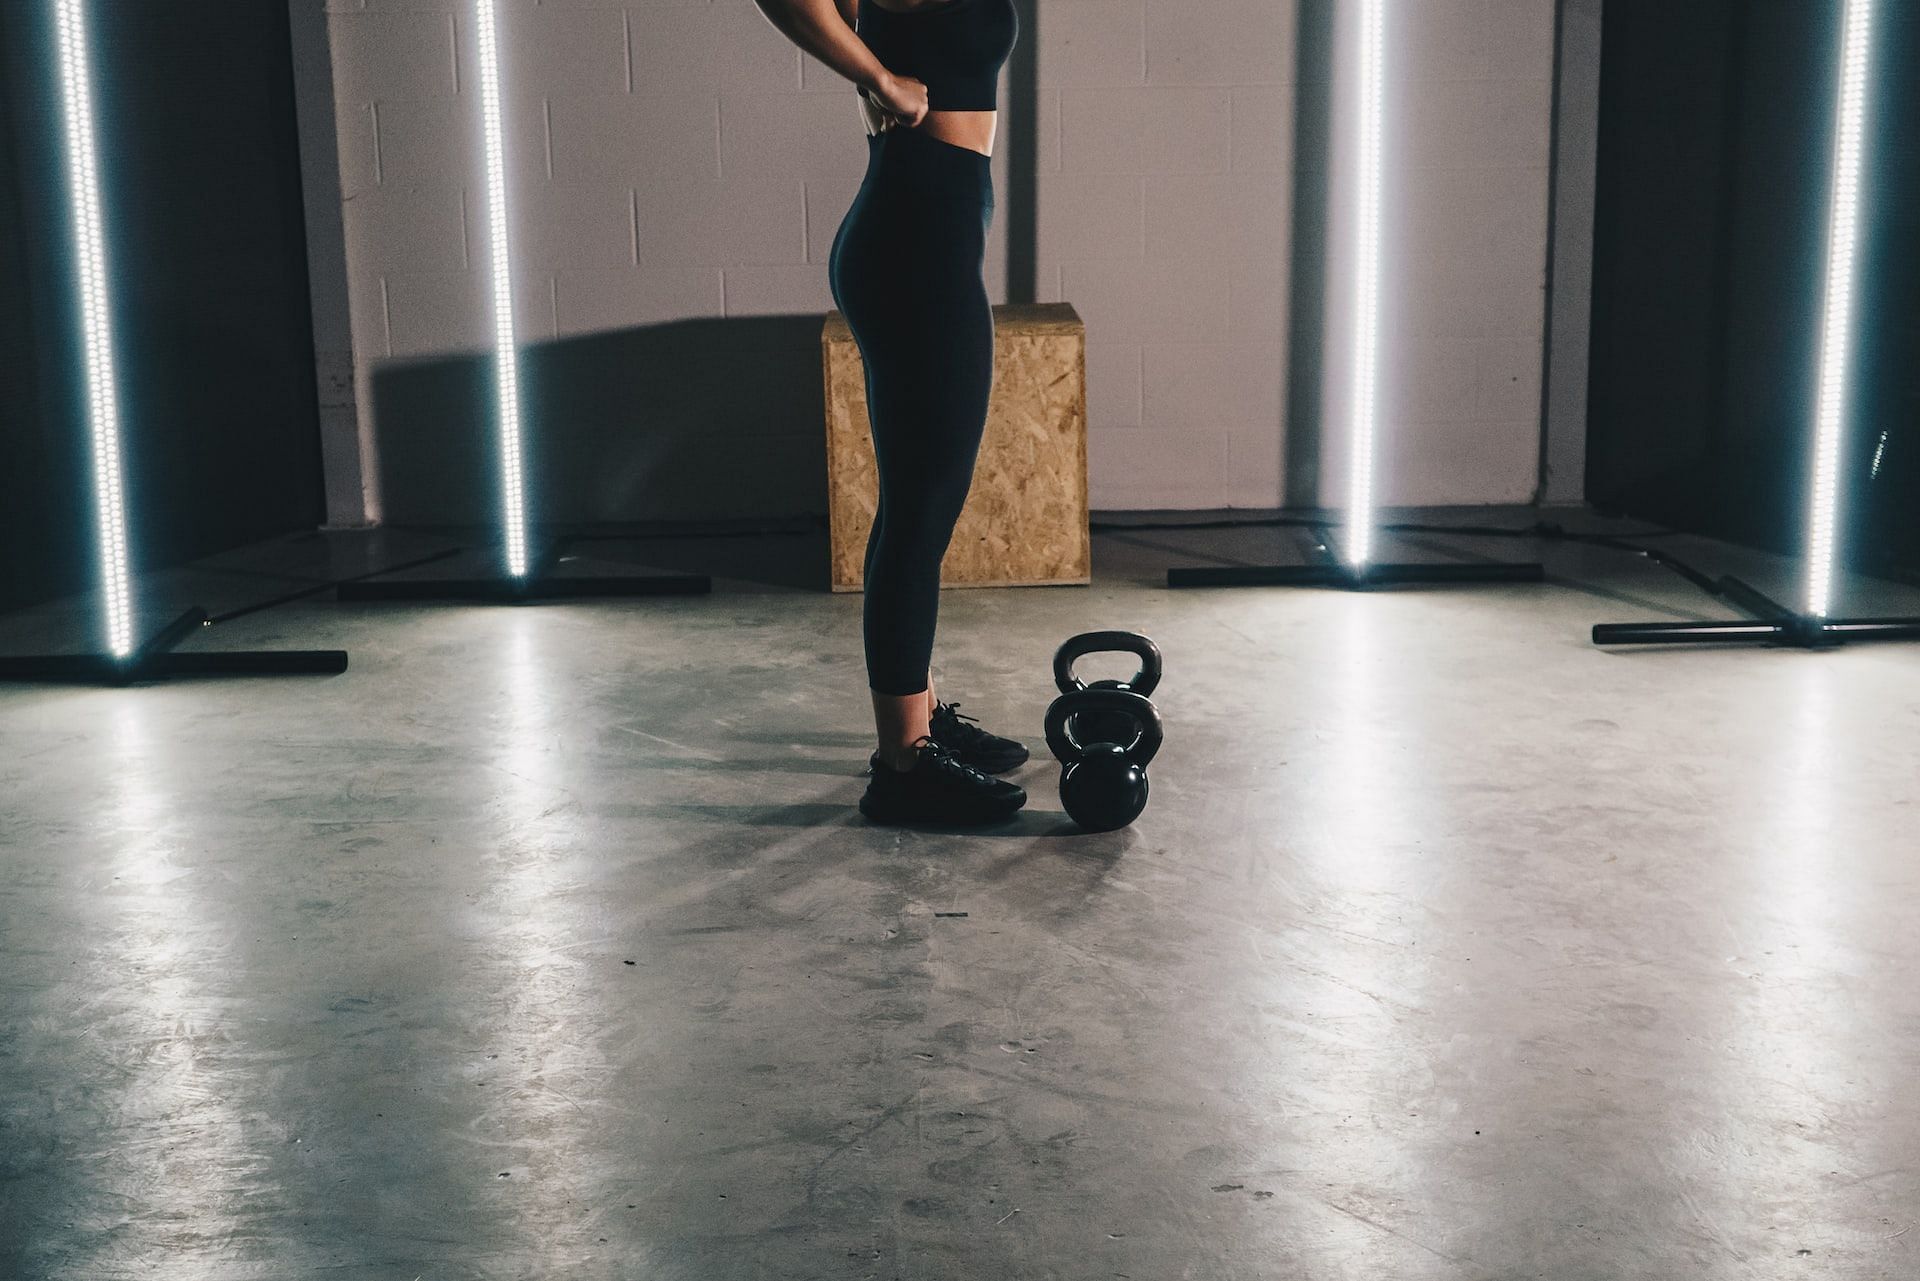 Various glute exercises can help with toning the hips. (Photo by Ambitious Creative Co. - Rick Barrett on Unsplash)